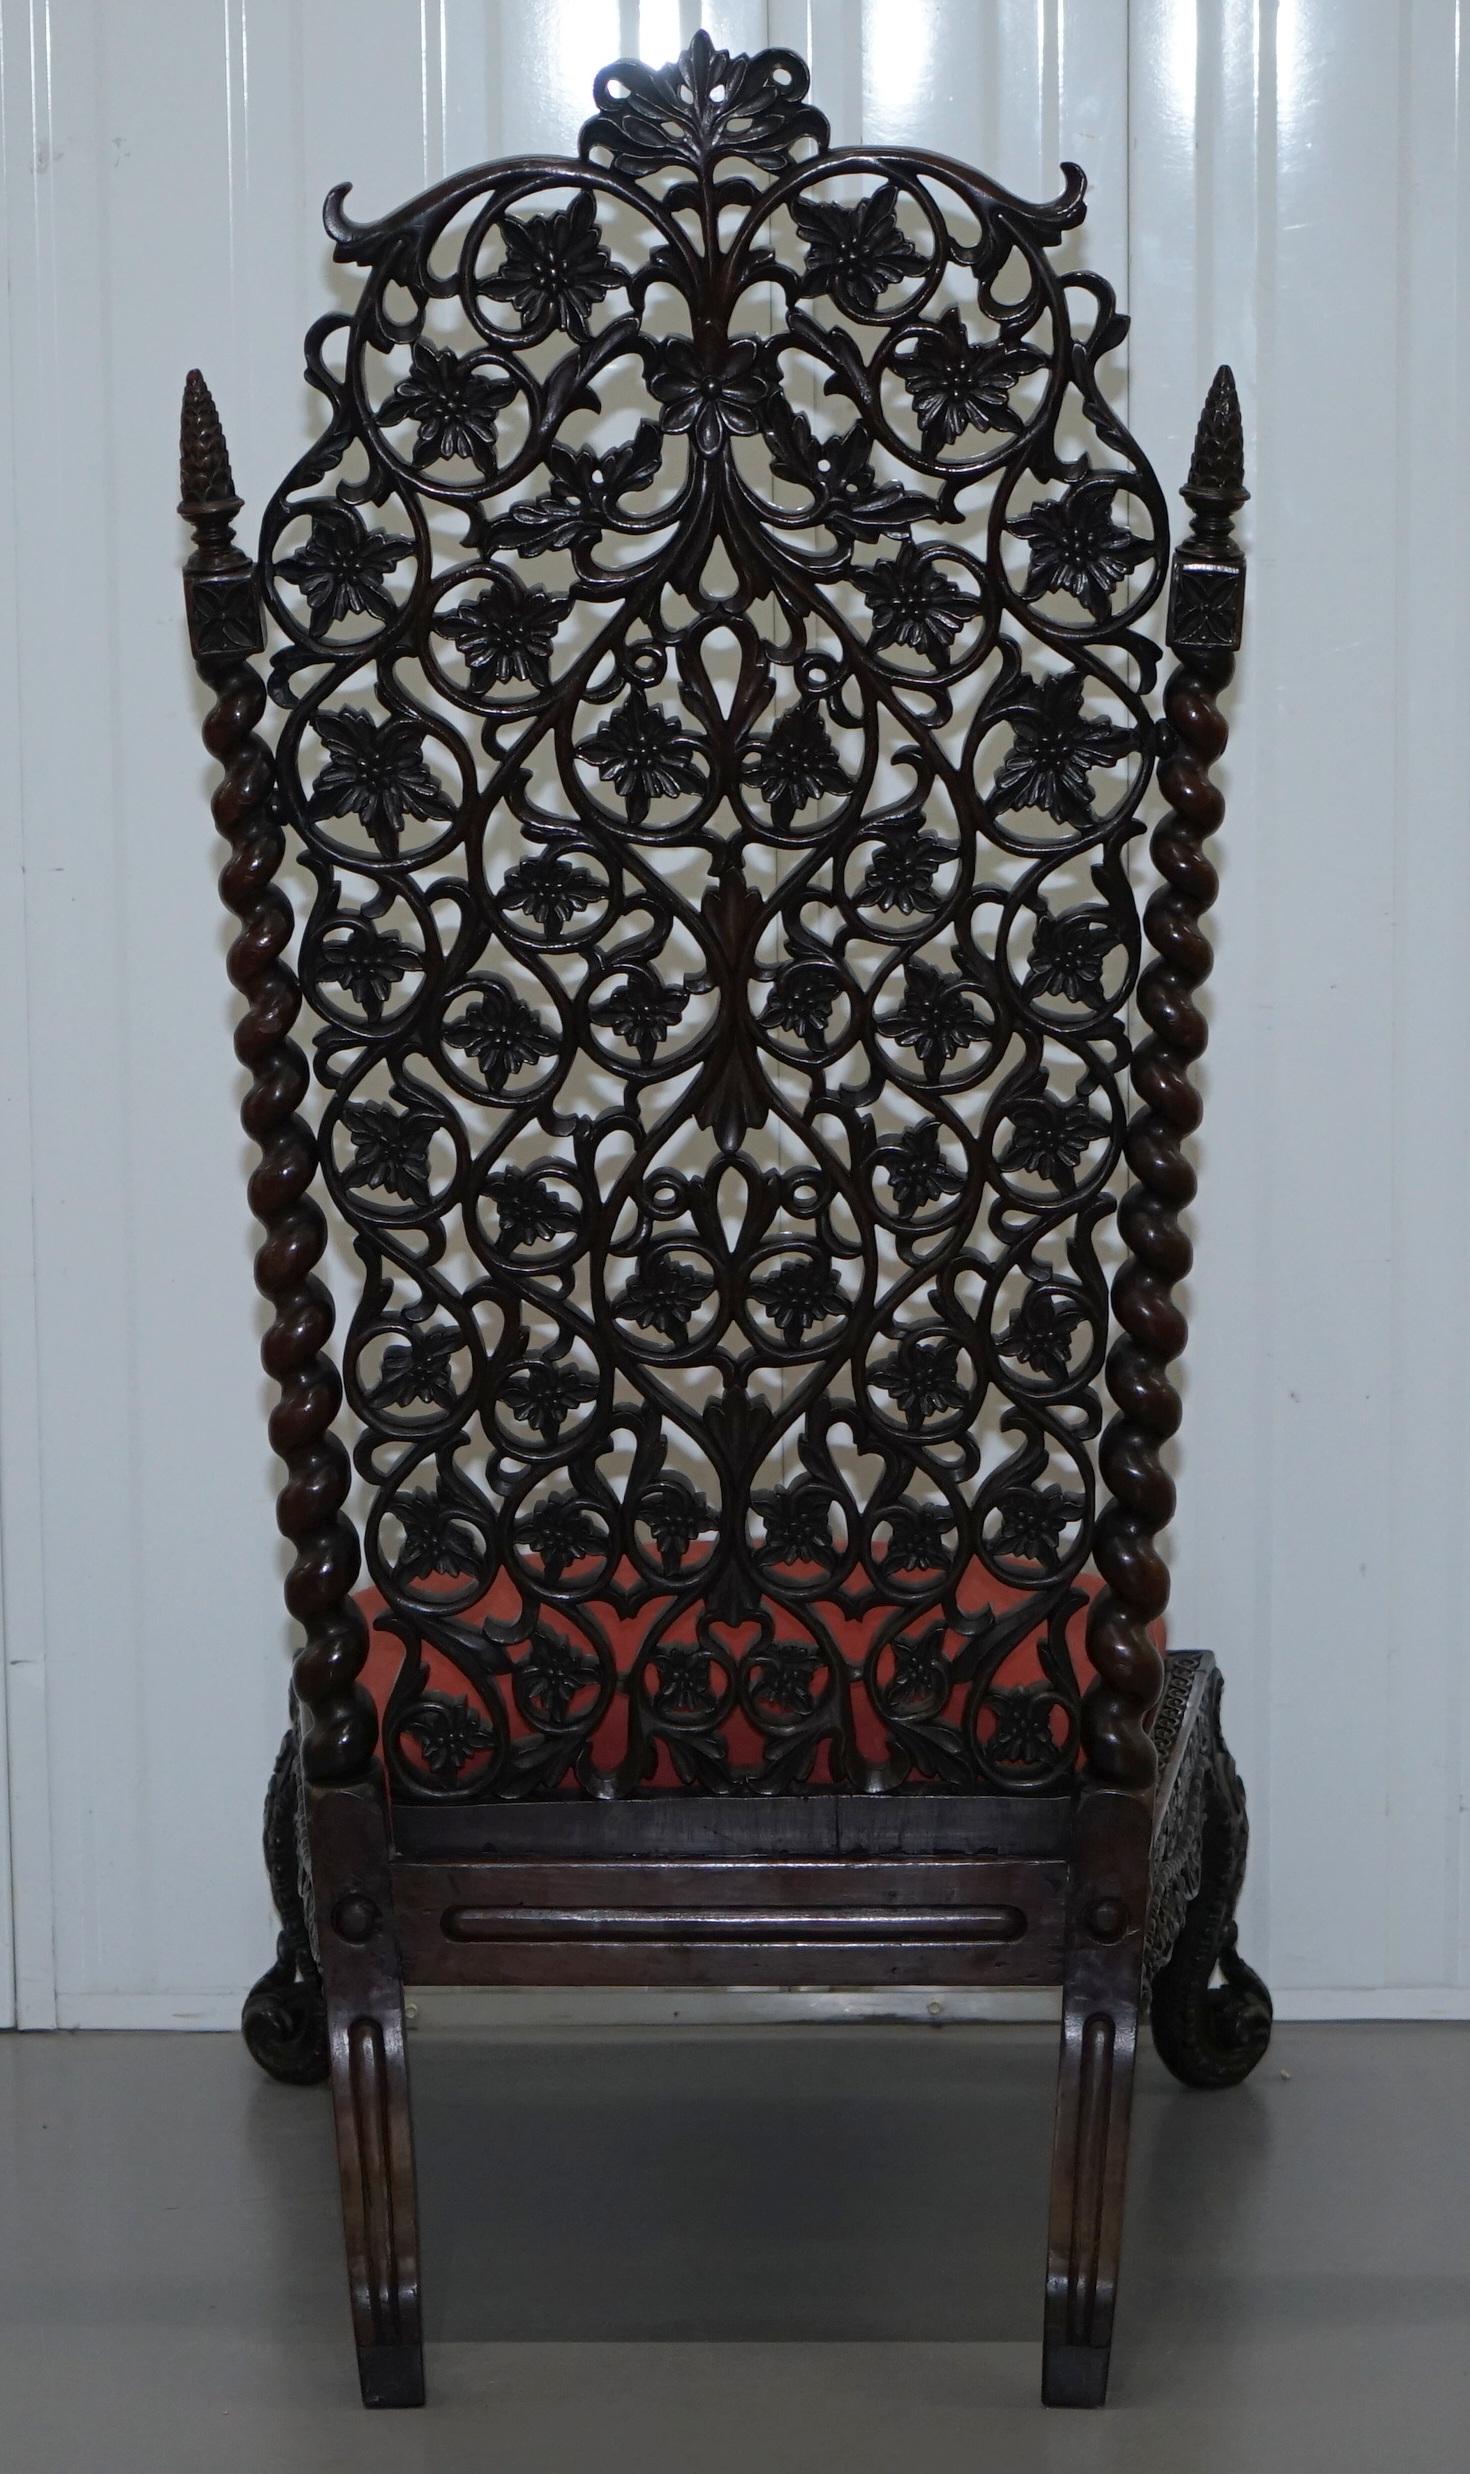 Rare circa 1880 Burmese Solid Hardwood Hand Carved Floral Chair High Back Ornate For Sale 7